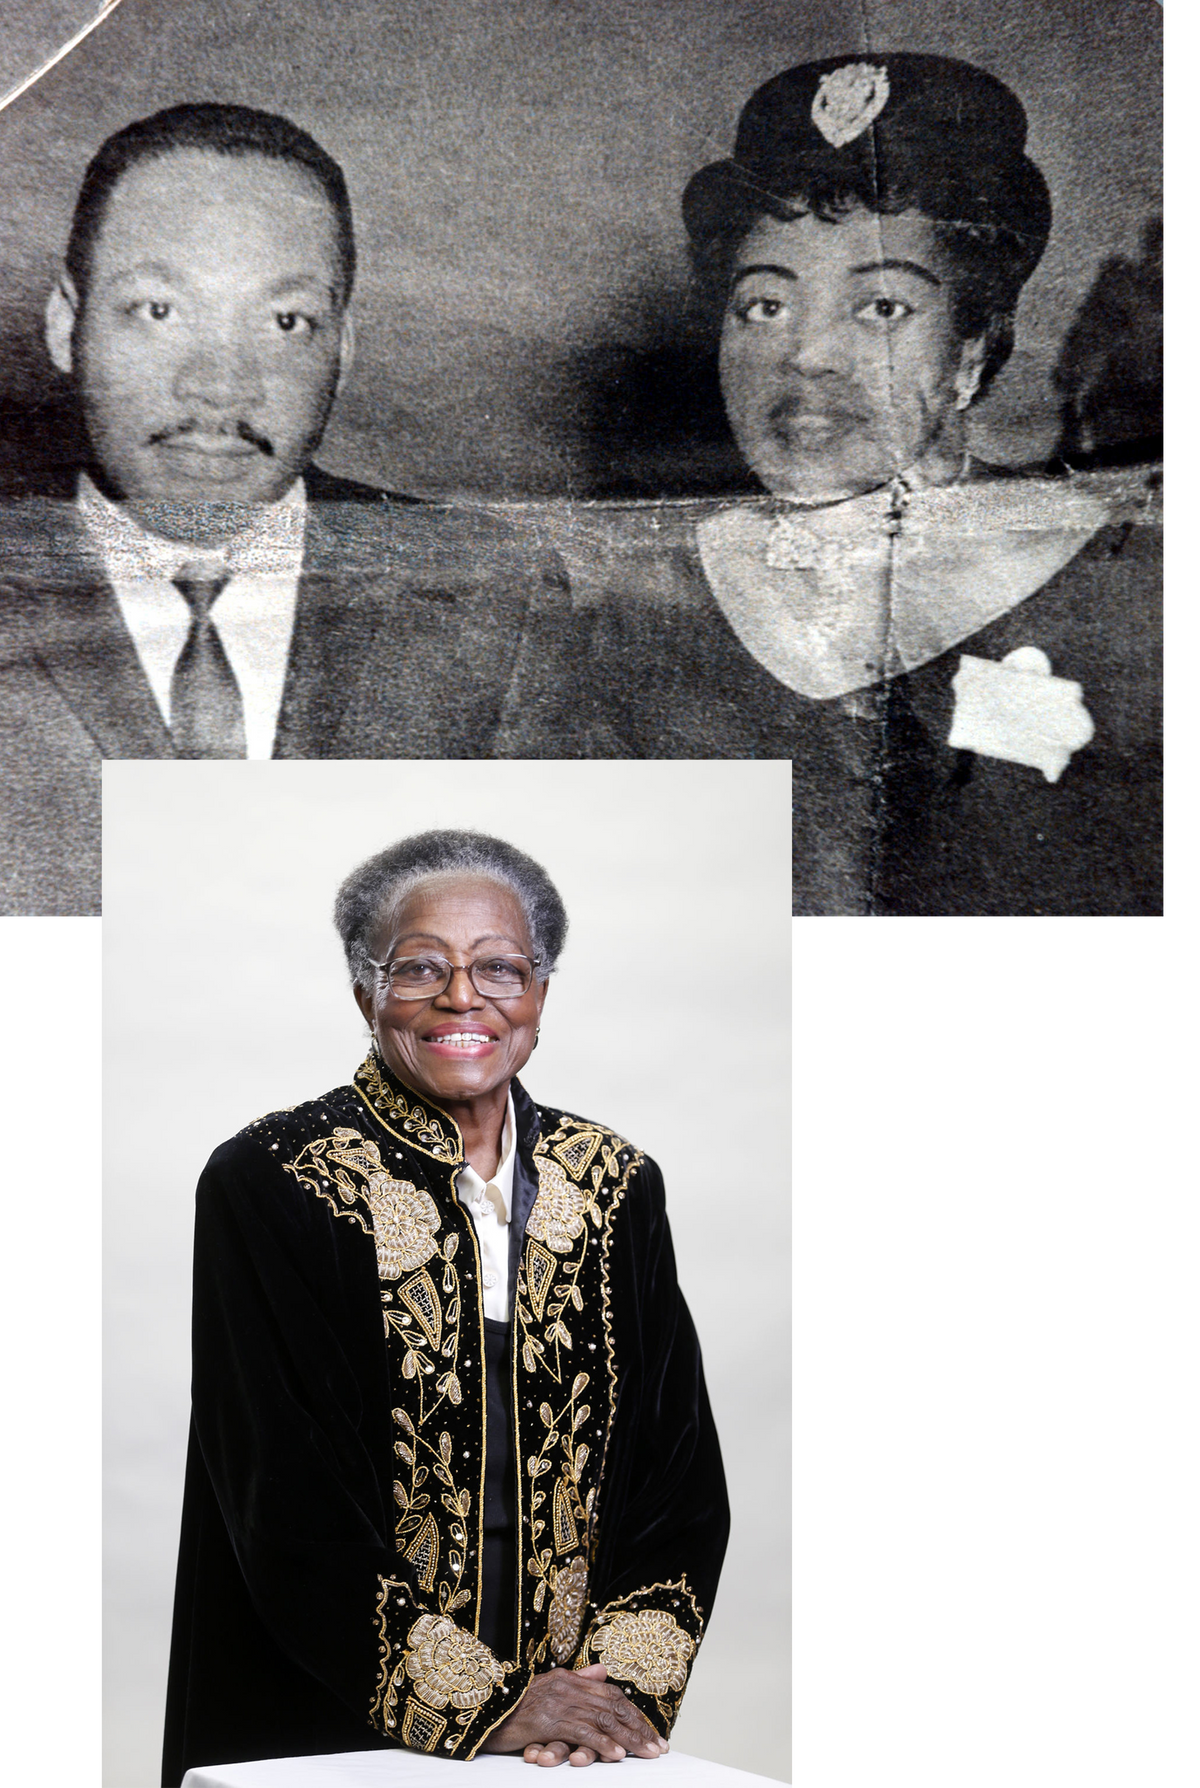 Anna Mae Weems with Martin Luther King Jr. during his visit to Waterloo in 1959 and below, in 2015 